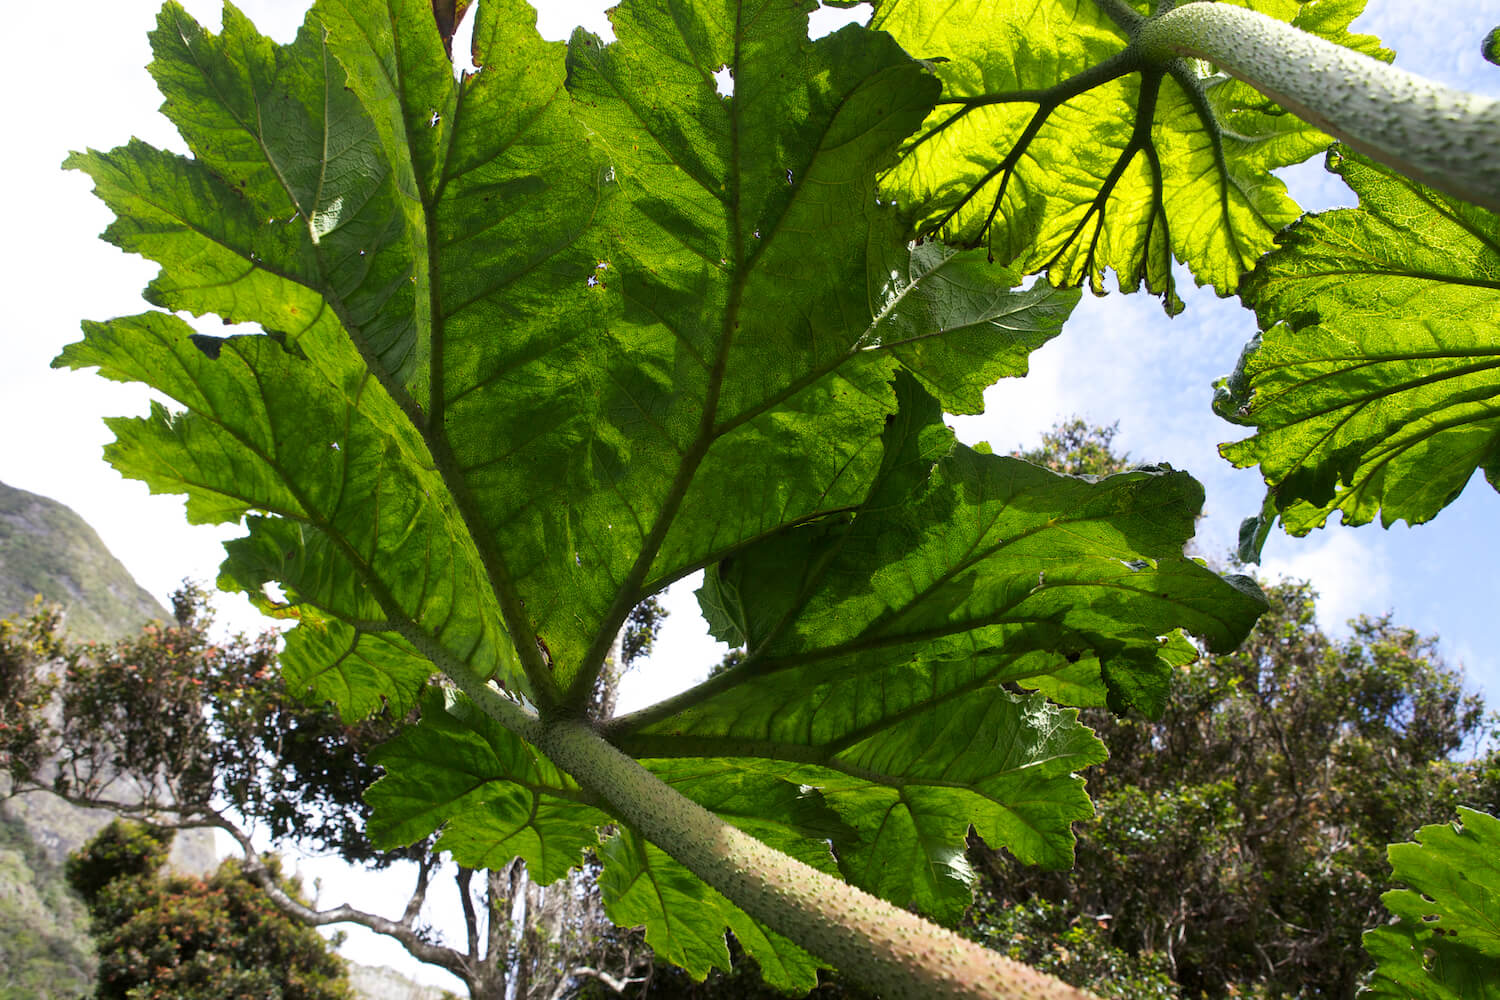 Close-up of large, green leaves.